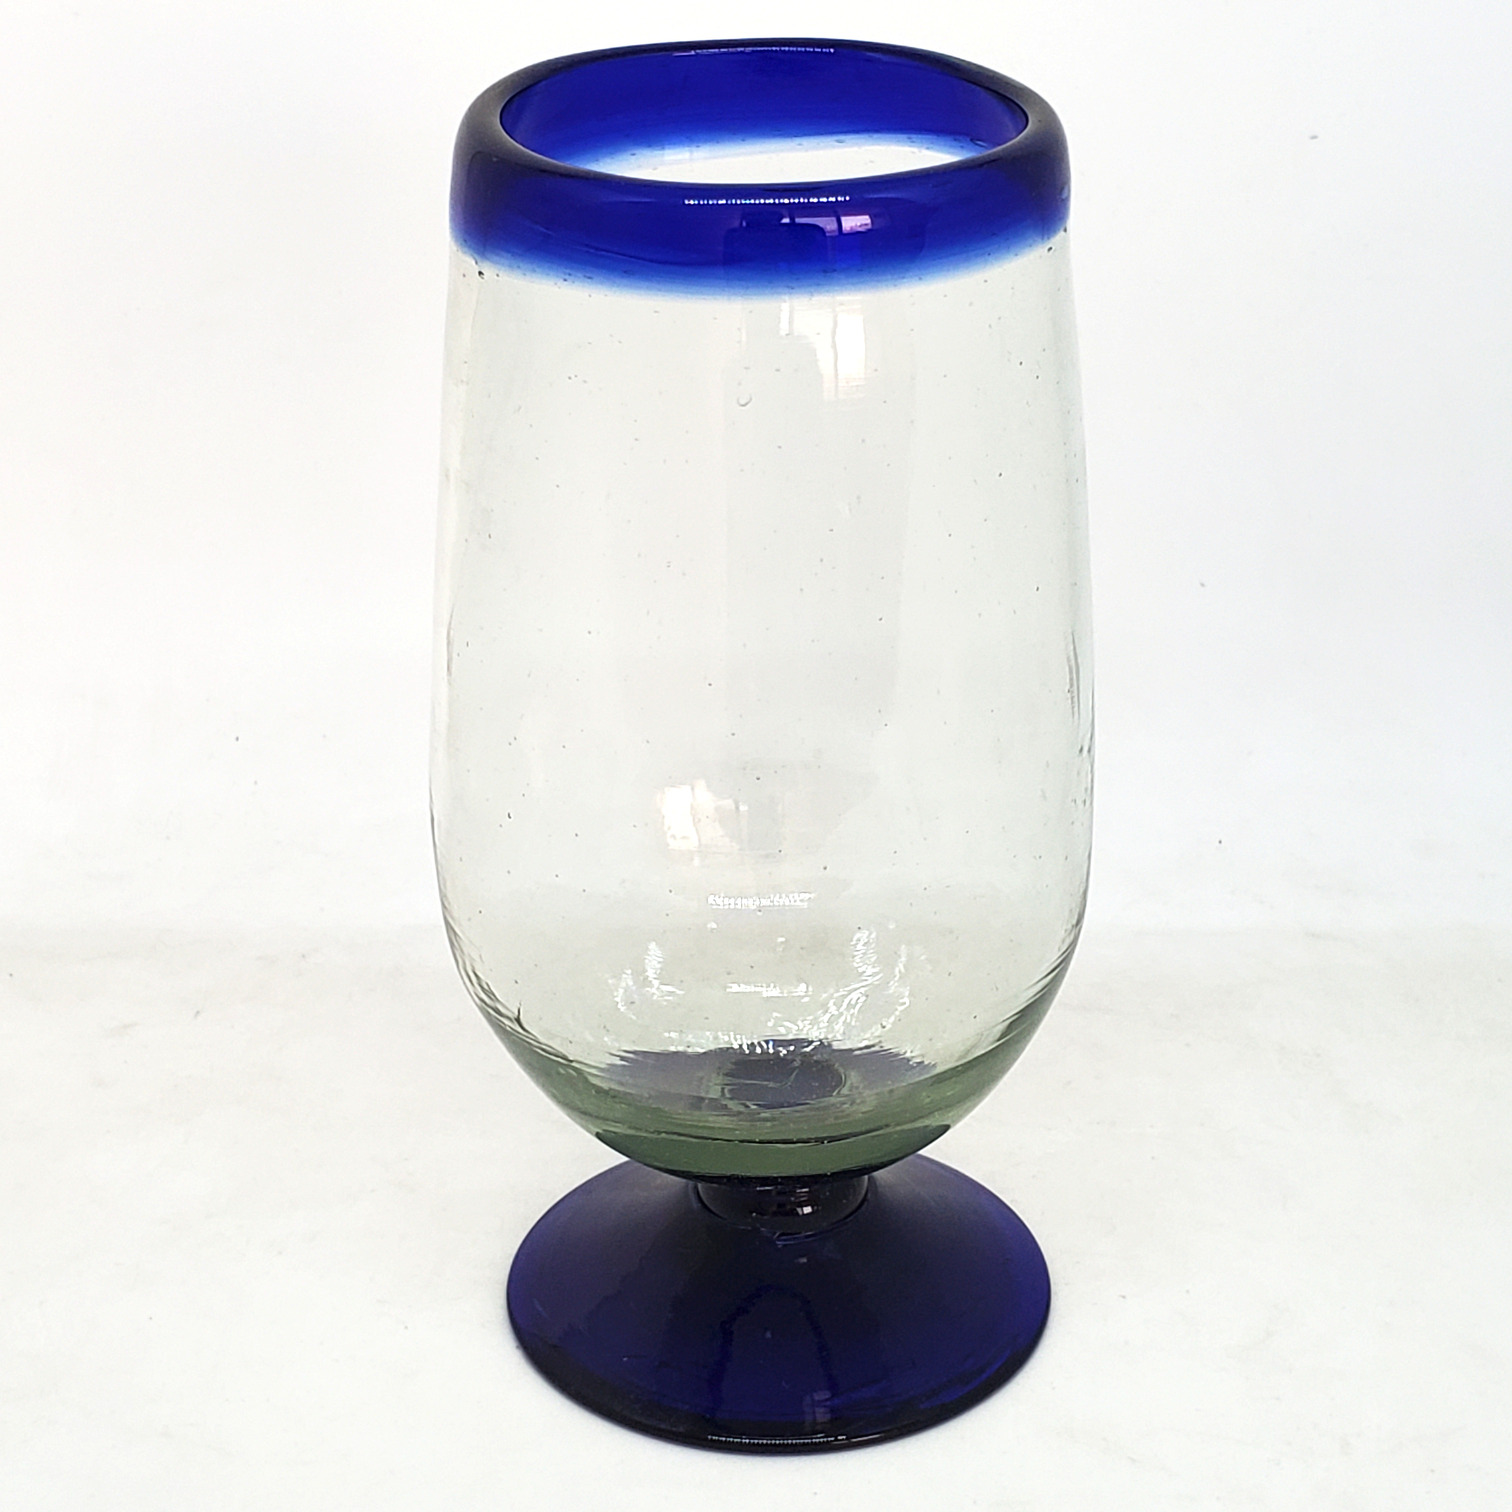 Wholesale Colored Rim Glassware / Cobalt Blue Rim 17 oz Tall Water Goblets  / These tall water goblets will embellish your table setting and give it a festive feel. Made from authentic hand blown recycled glass.